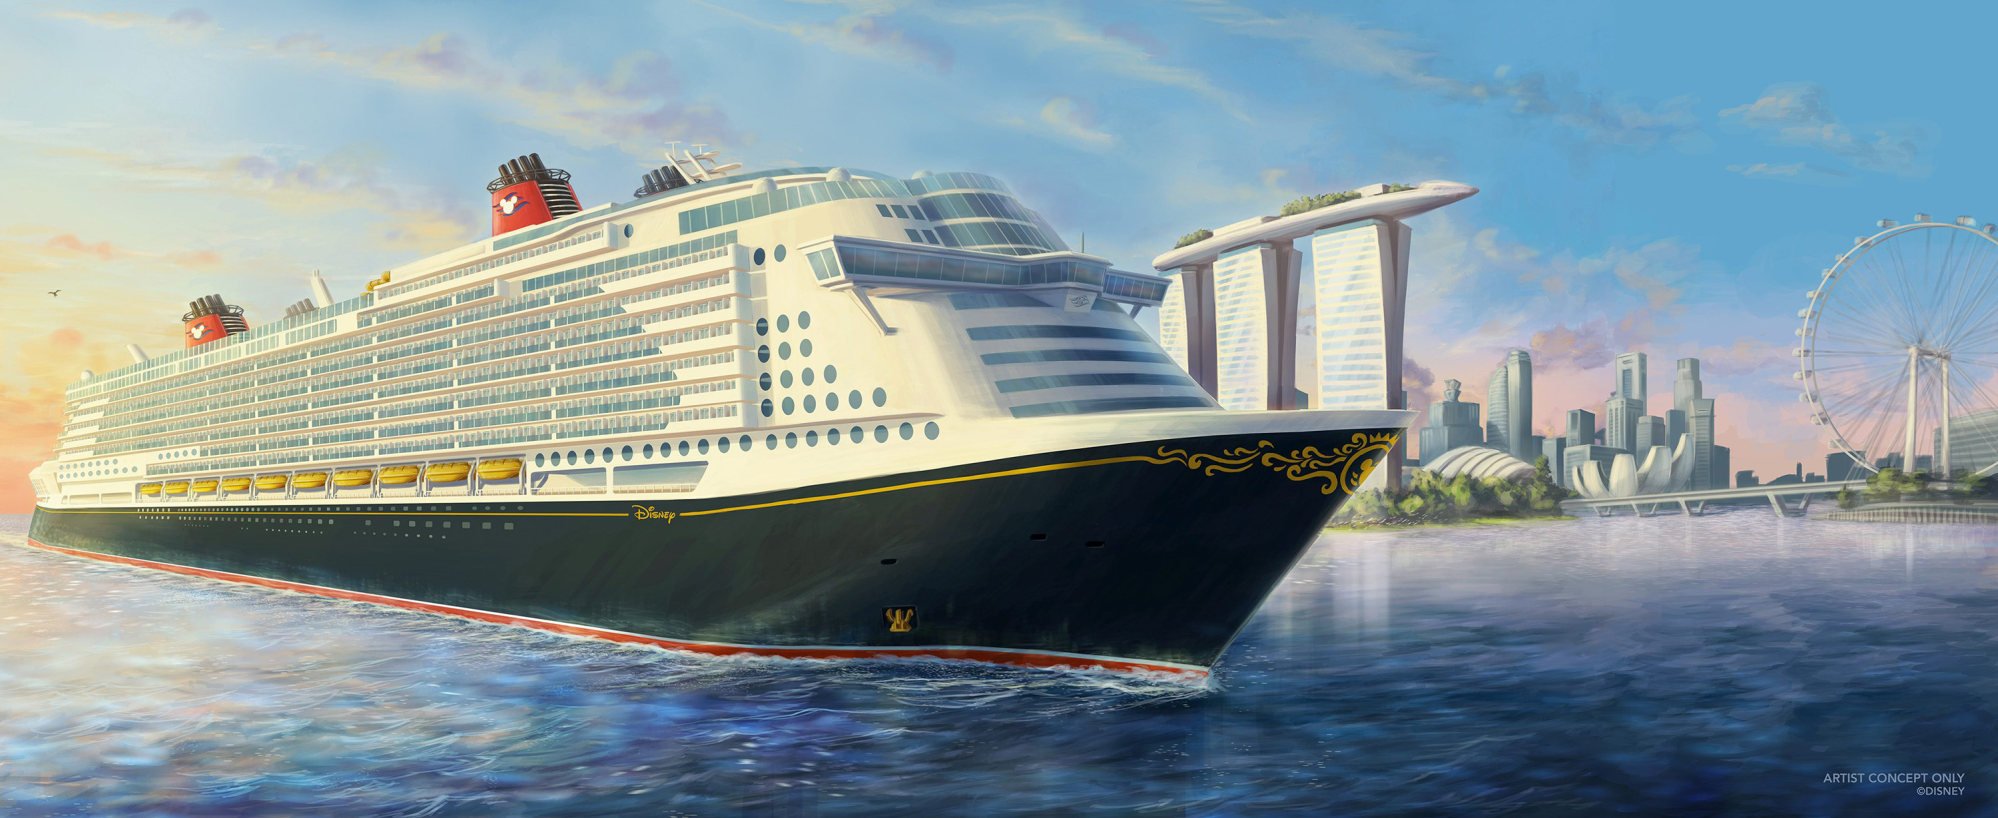 An artist’s impression of the Disney ship in Singapore. Photo: TNS